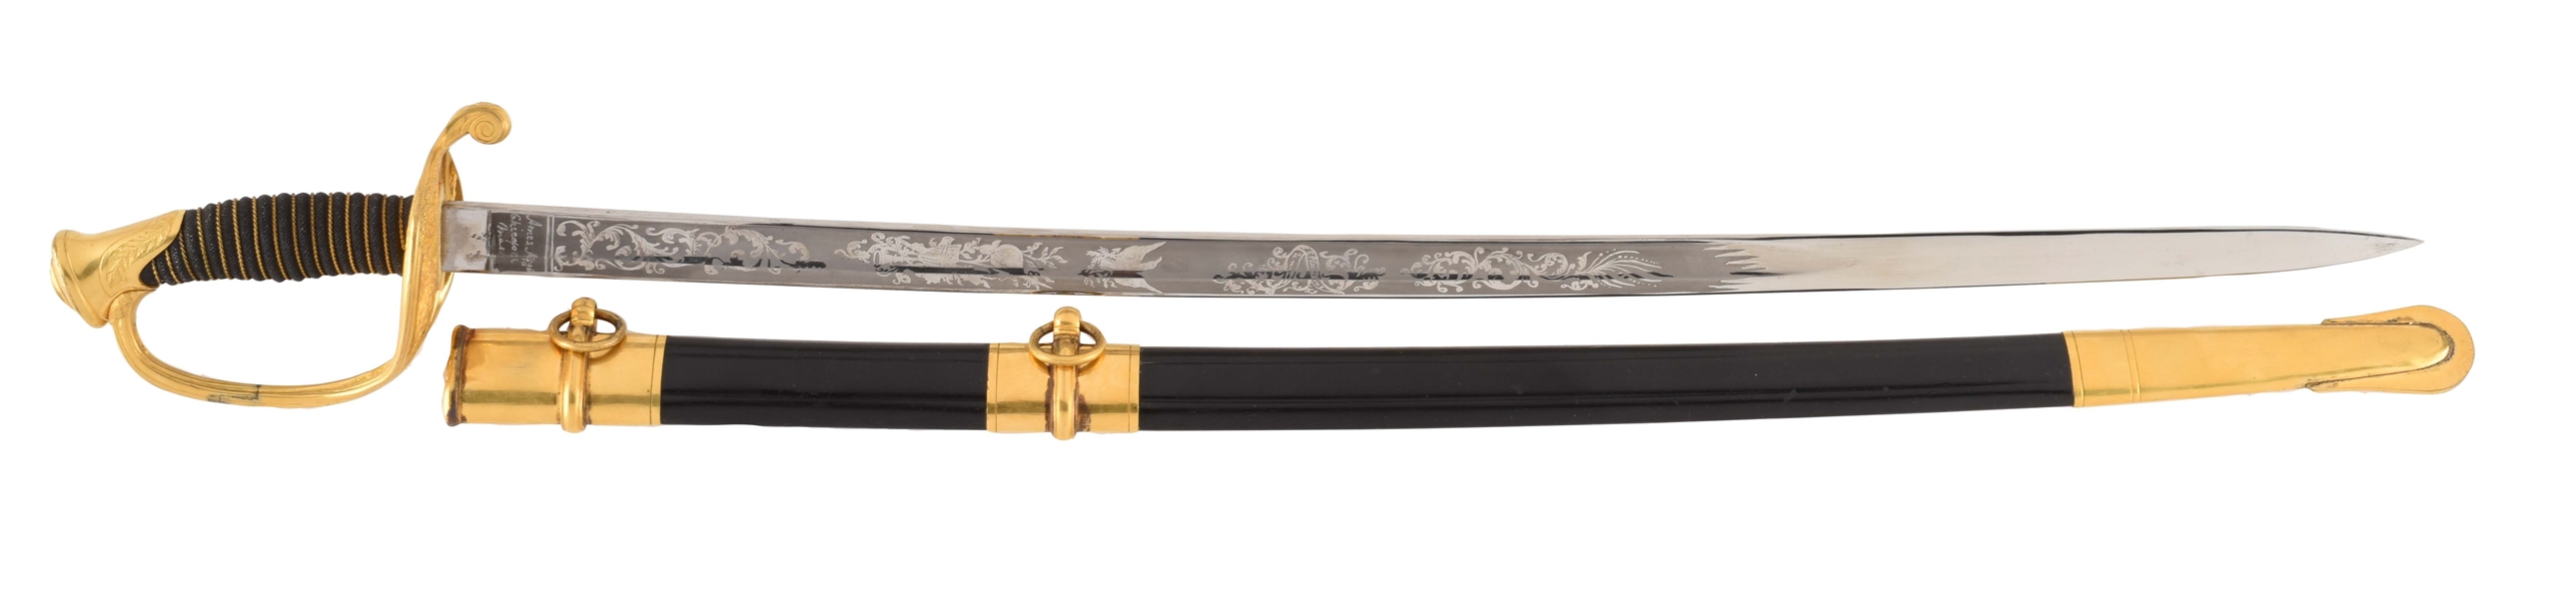 EXTREMELY FINE AMES MODEL 1850 FOOT OFFICERS SWORD.